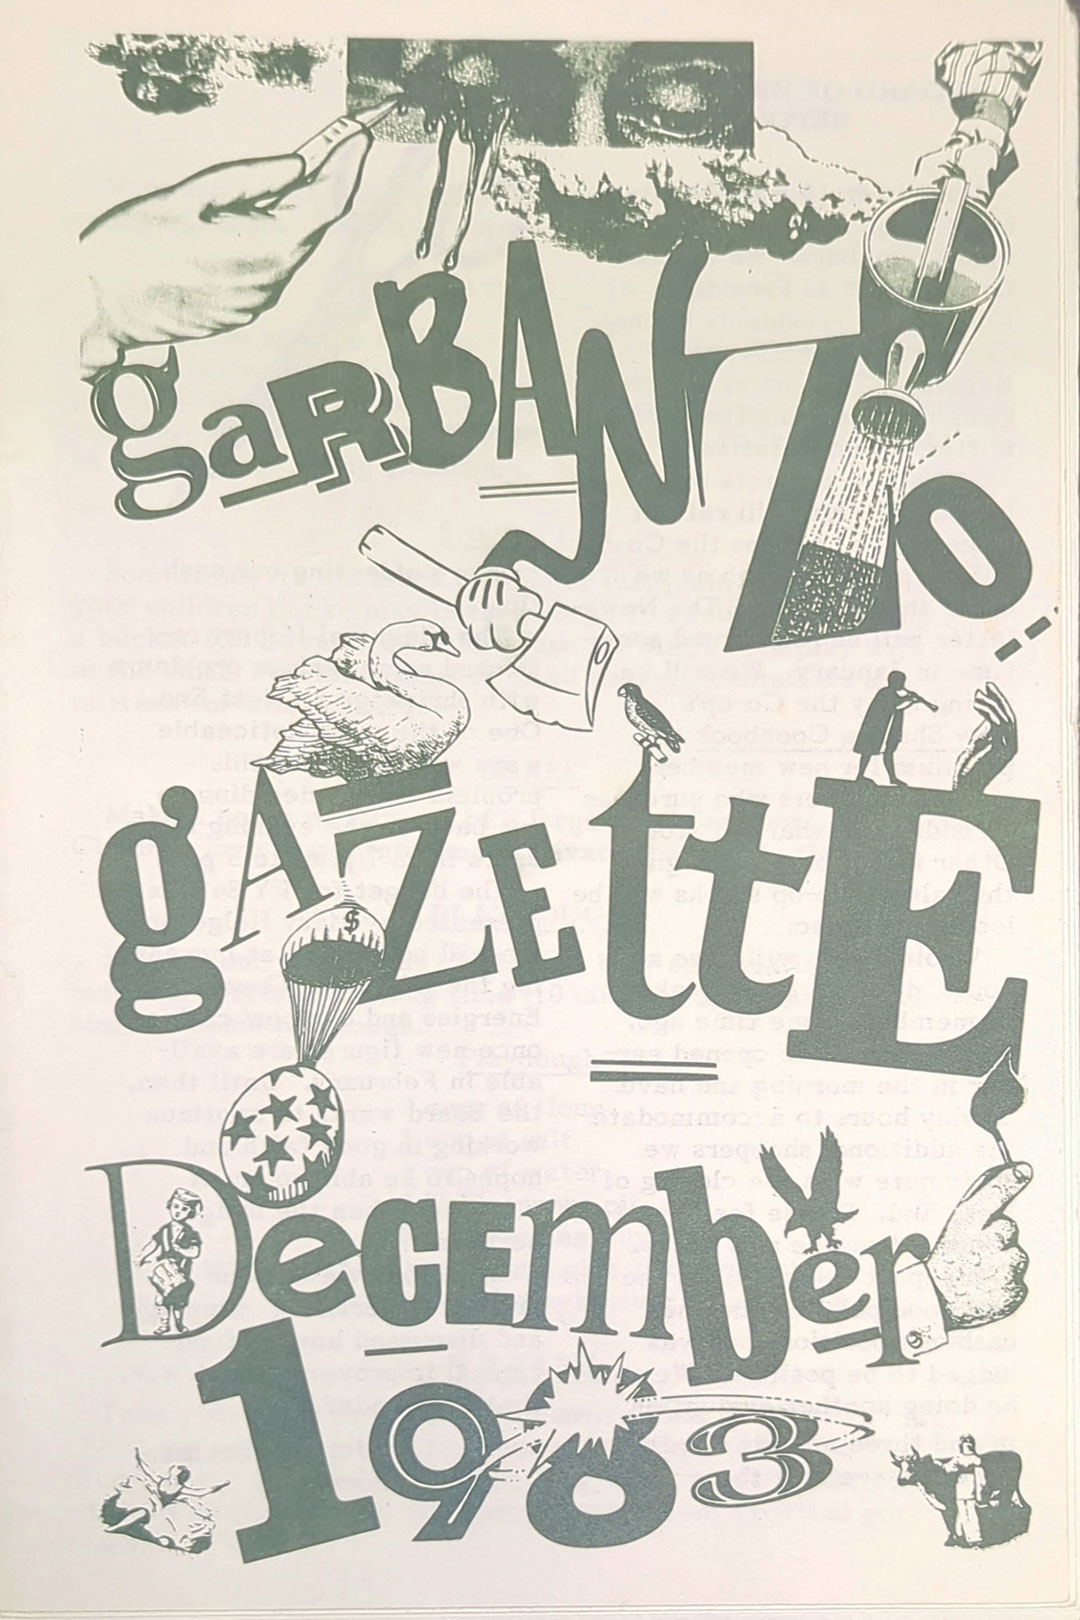 A collage-style cover features eclectic illustrations and varying font sizes. The words "Garbanzo Gazette December 1983" are creatively arranged among images like a hand holding a pen, a weightlifter, a star, and a paintbrush, capturing the vibrant spirit of Whole Foods Coop Duluth MN.